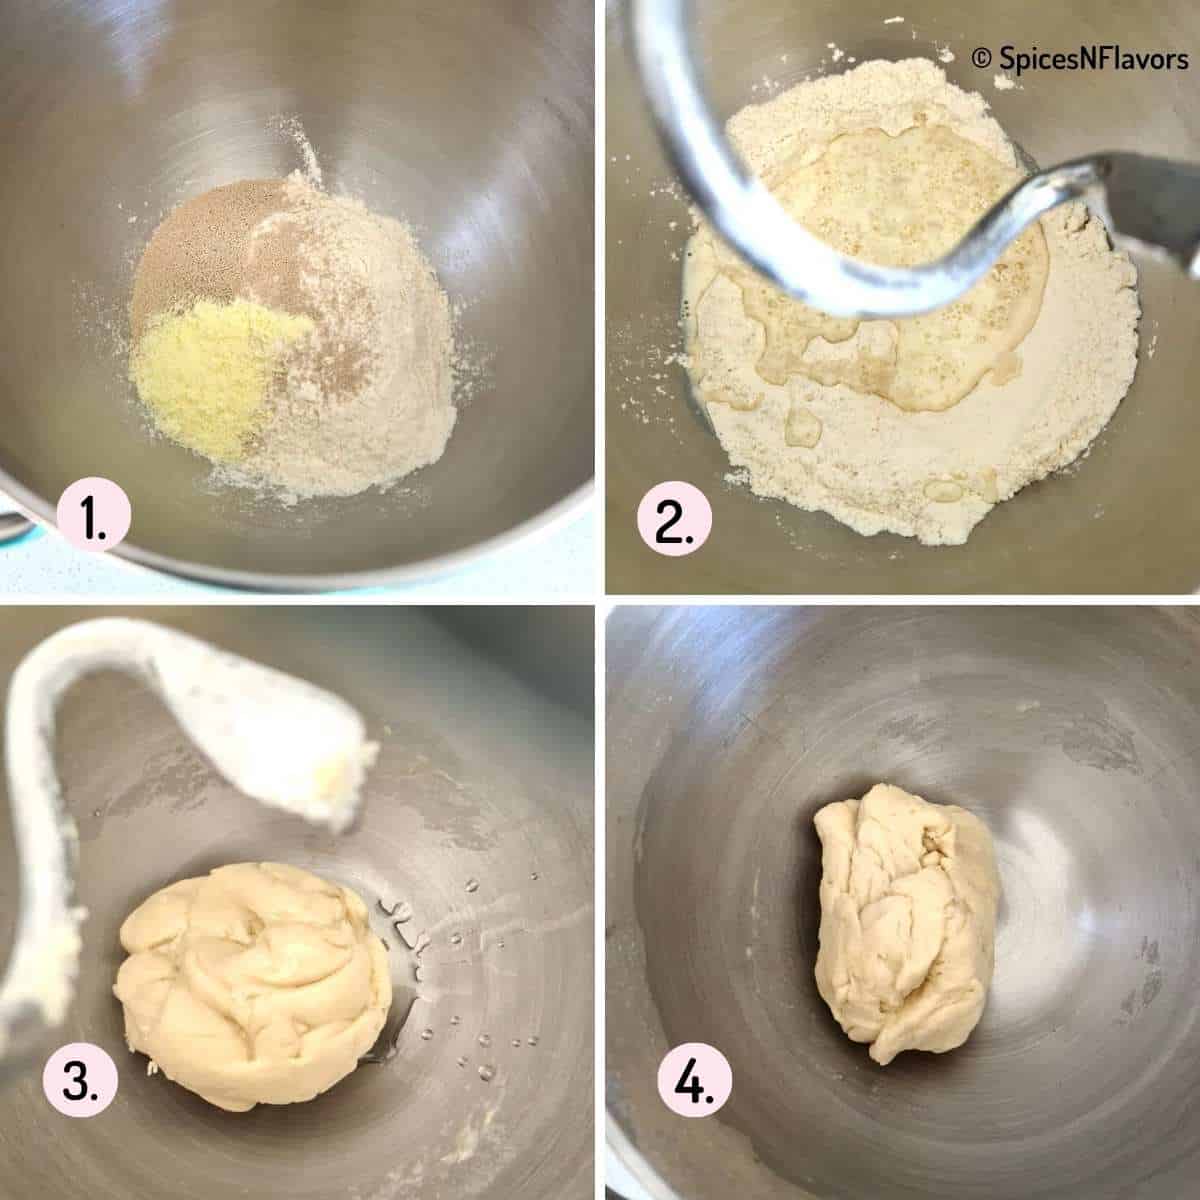 mixing dry and wet ingredients to form the naan bread dough